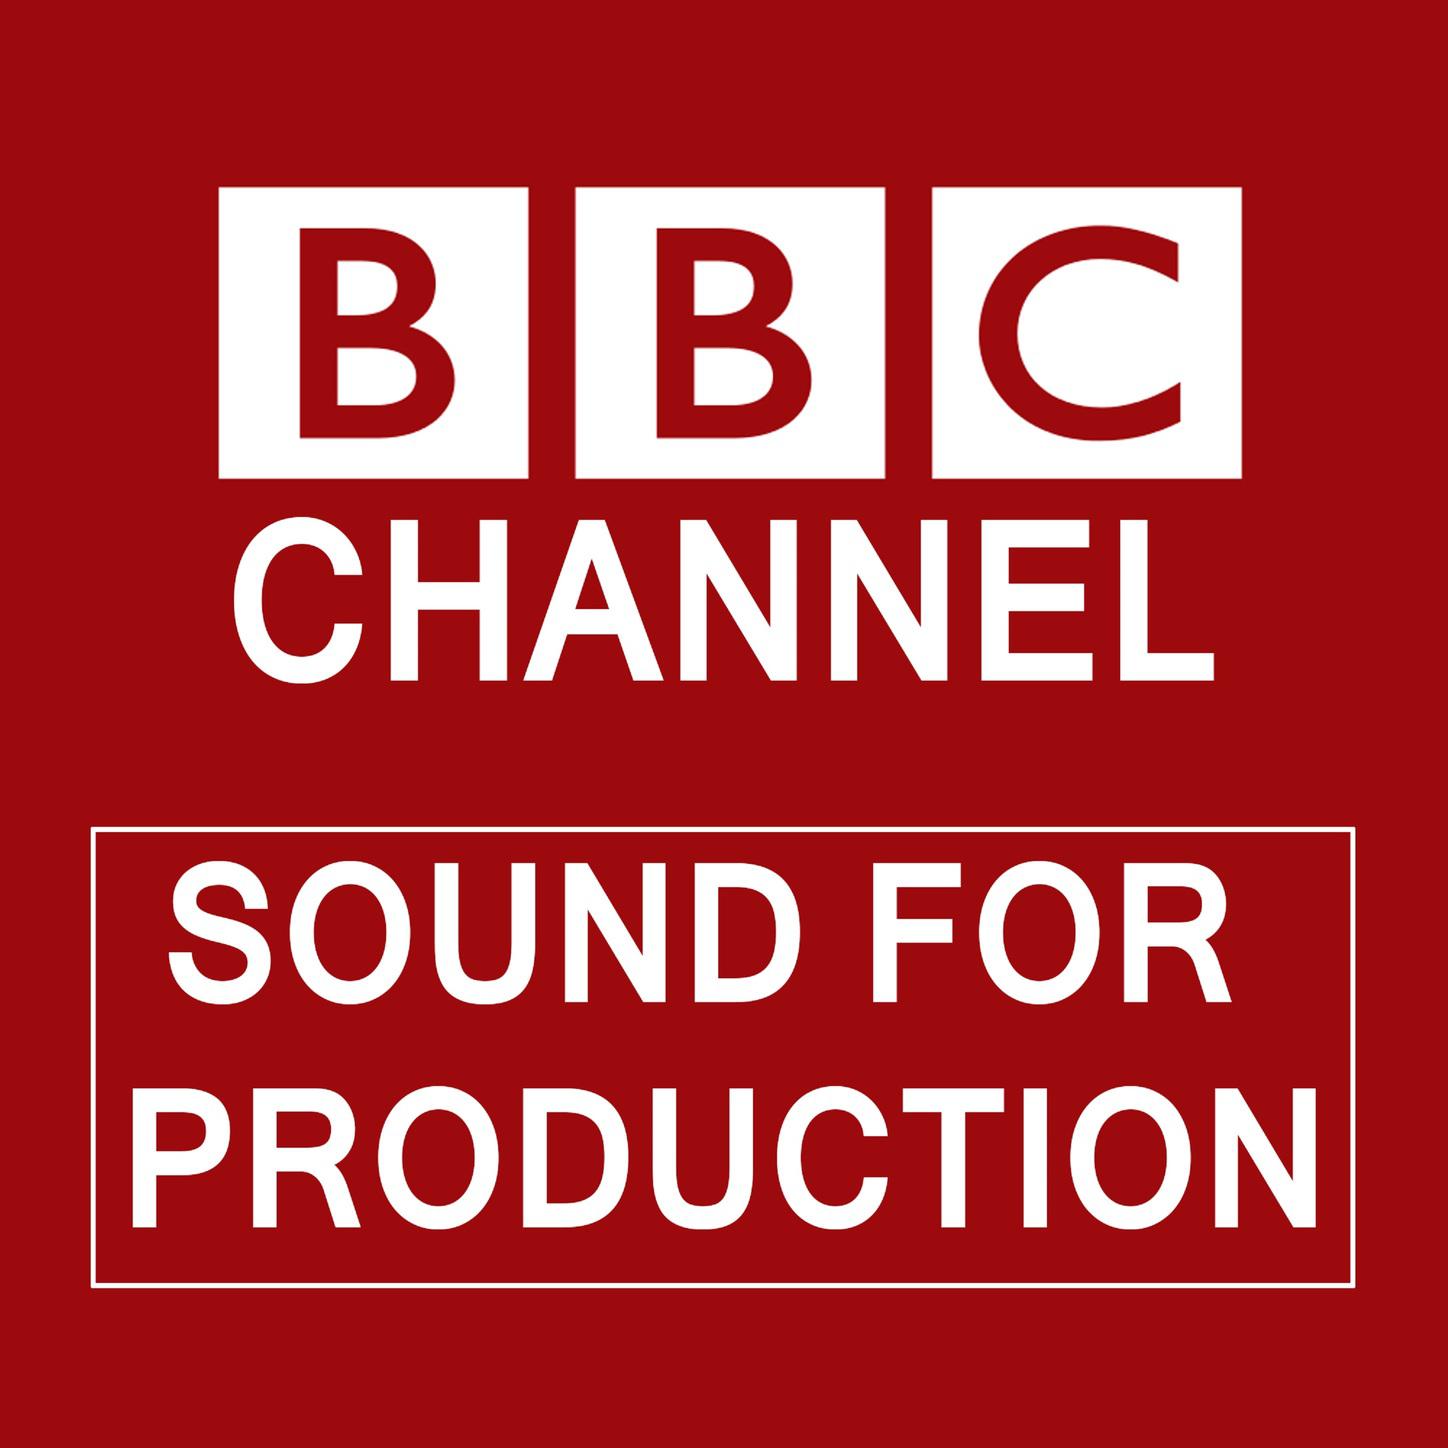 Sound For Production BBC Channel